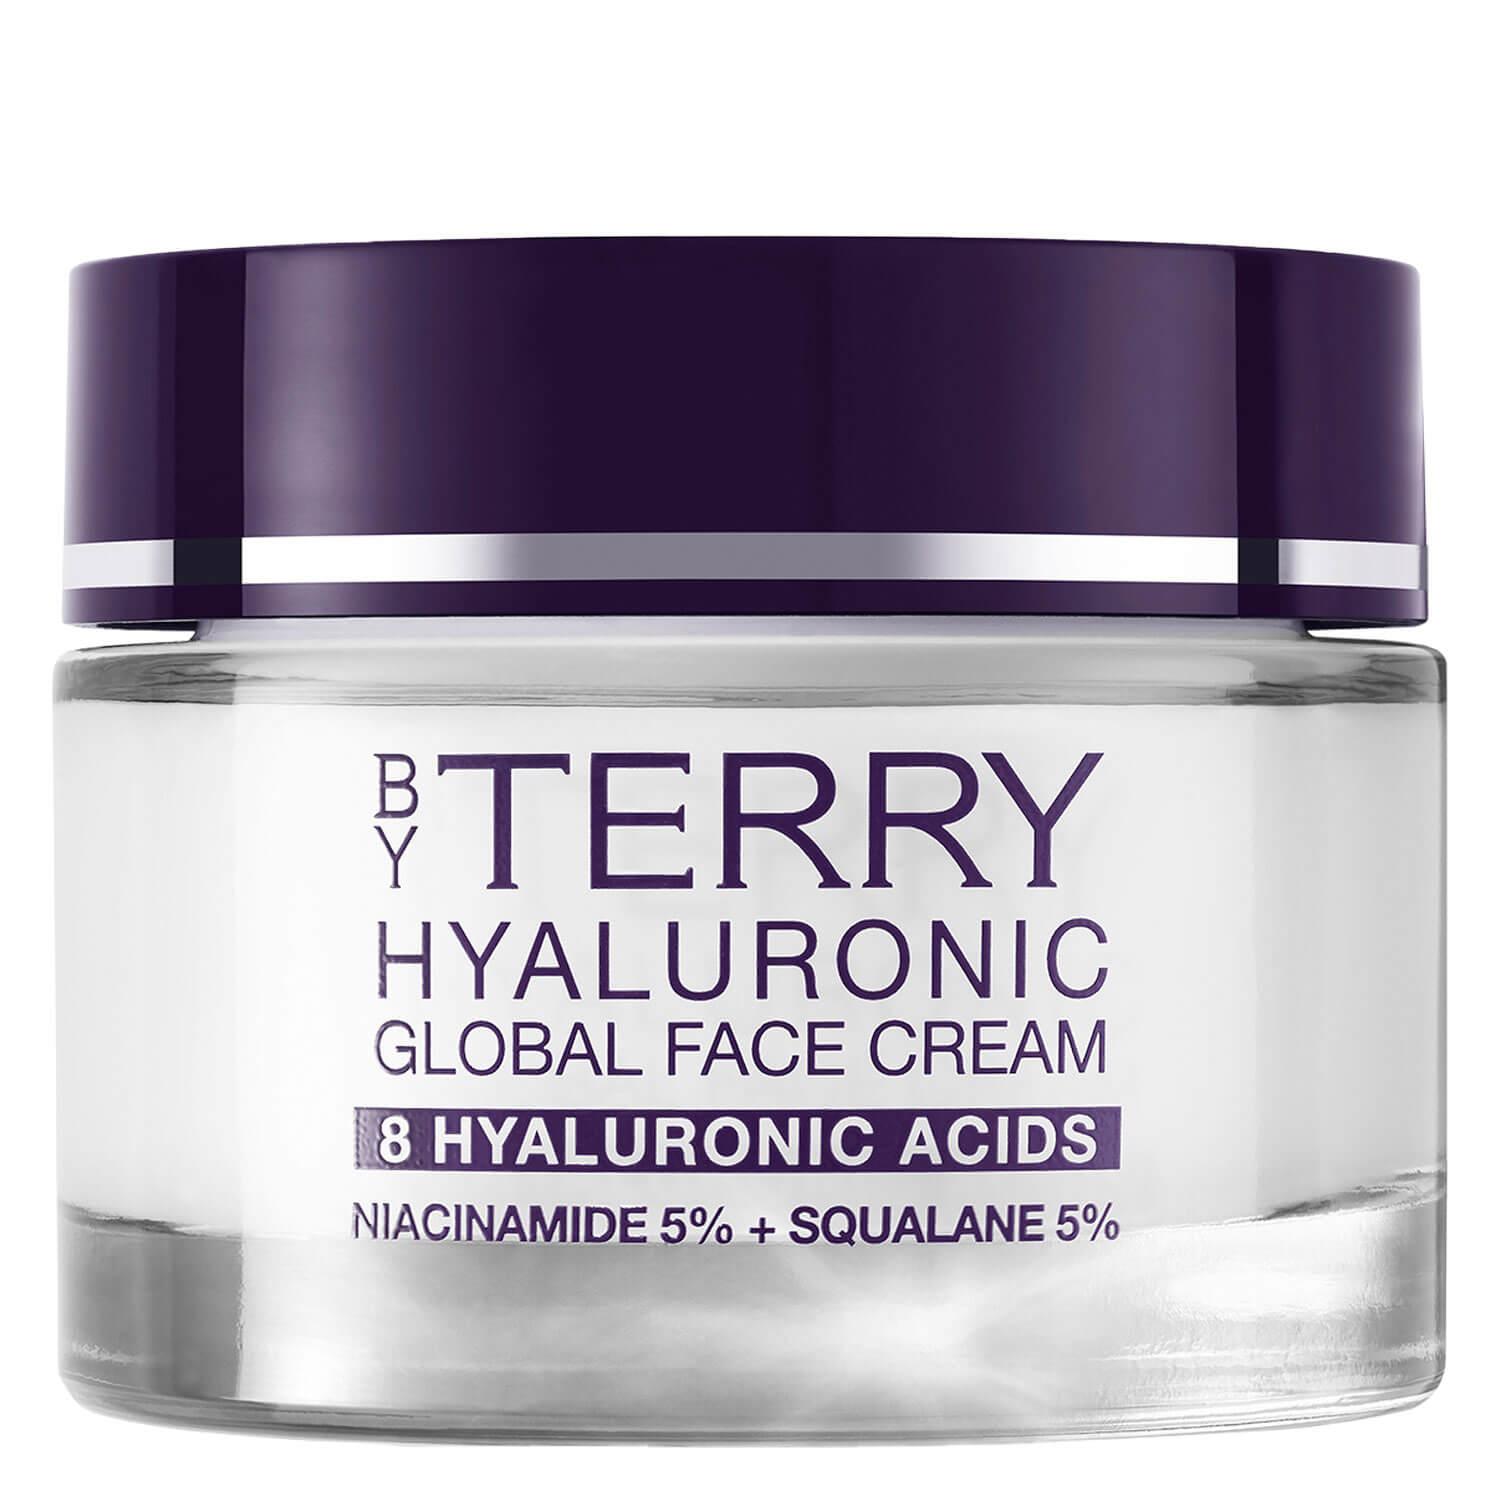 By Terry Care - Hyaluronic Global Face Cream